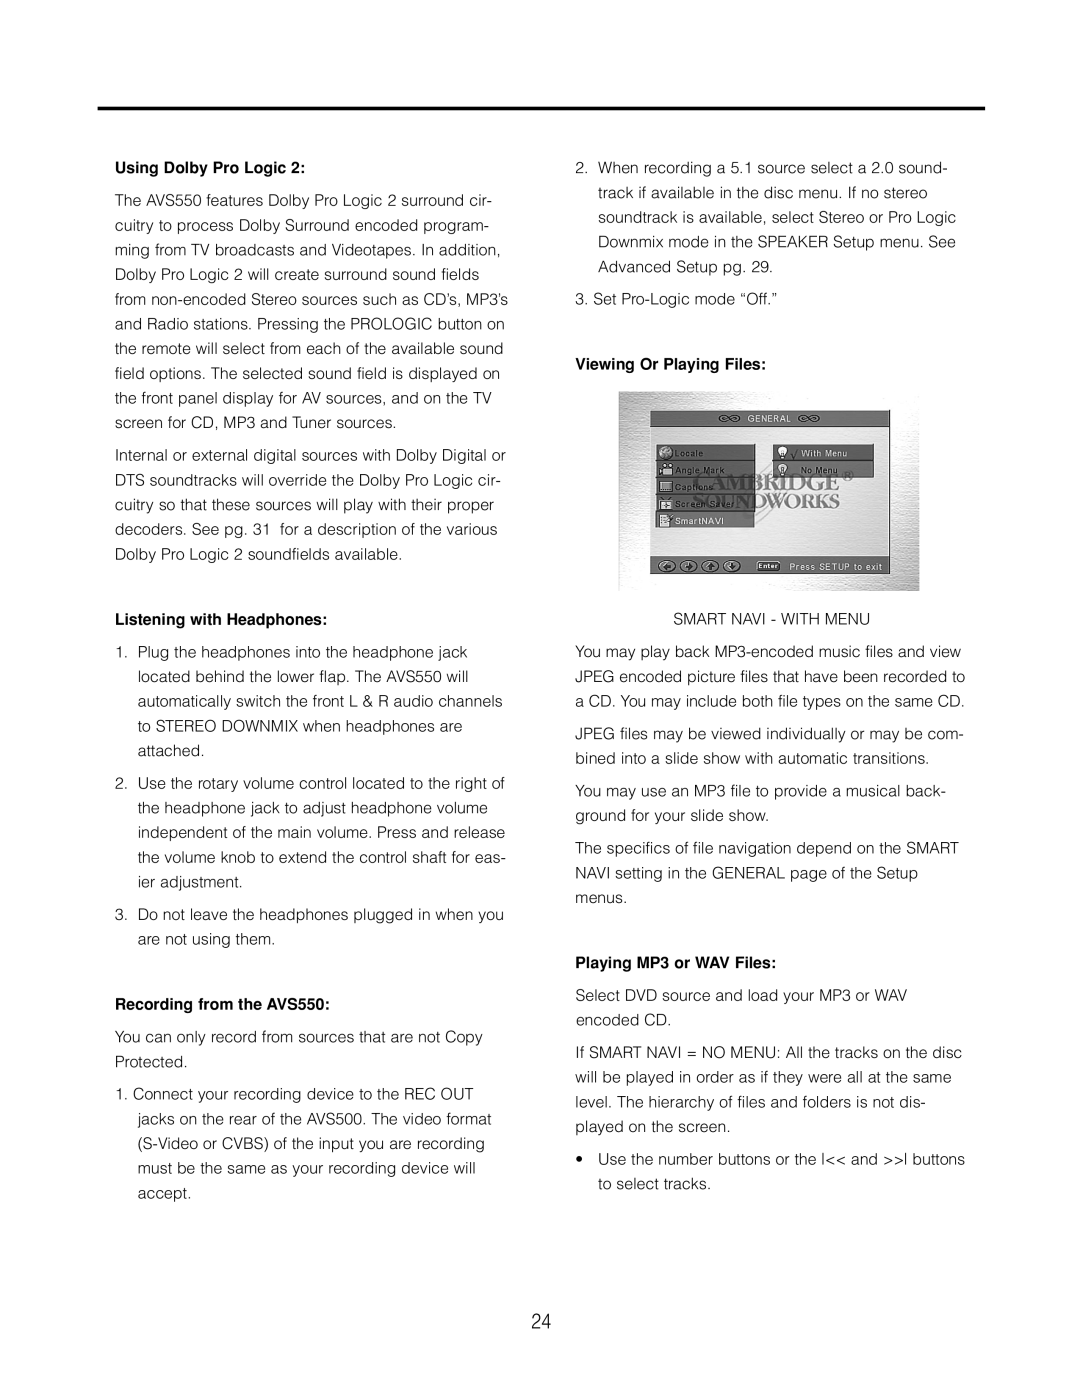 Cambridge SoundWorks user manual Using Dolby Pro Logic, Listening with Headphones, Recording from the AVS550 